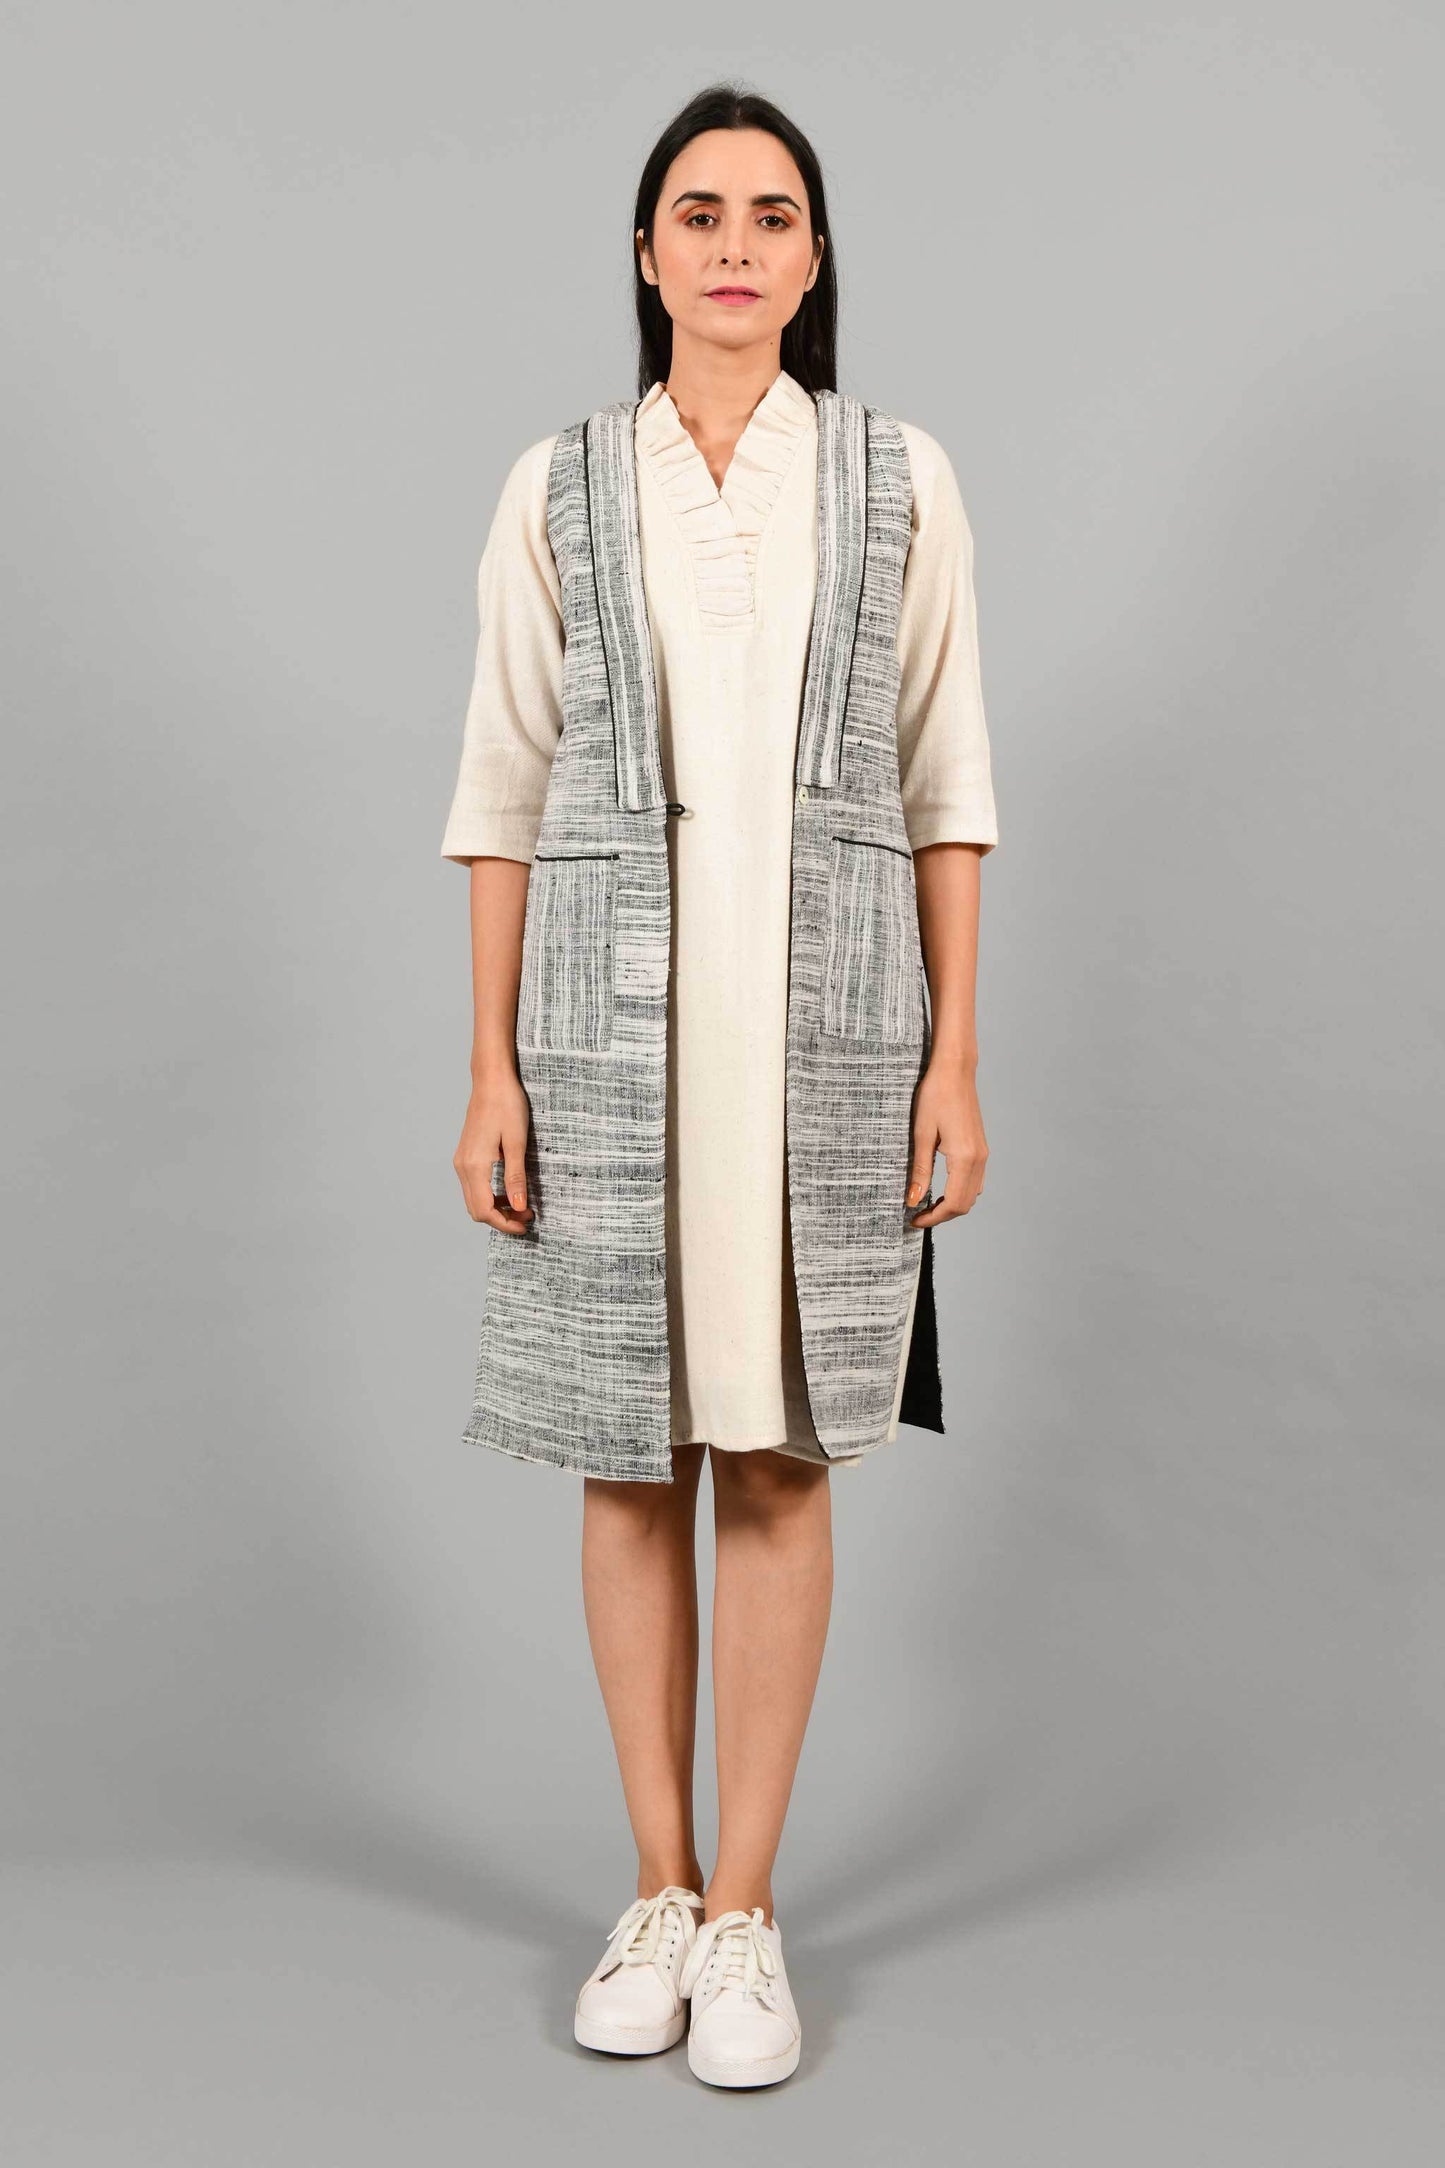 Front pose of an Indian Womenswear female model wearing black and white thicker handspun and handwoven khadi Jacket over a Cashemer Cotton Dress by Cotton Rack.